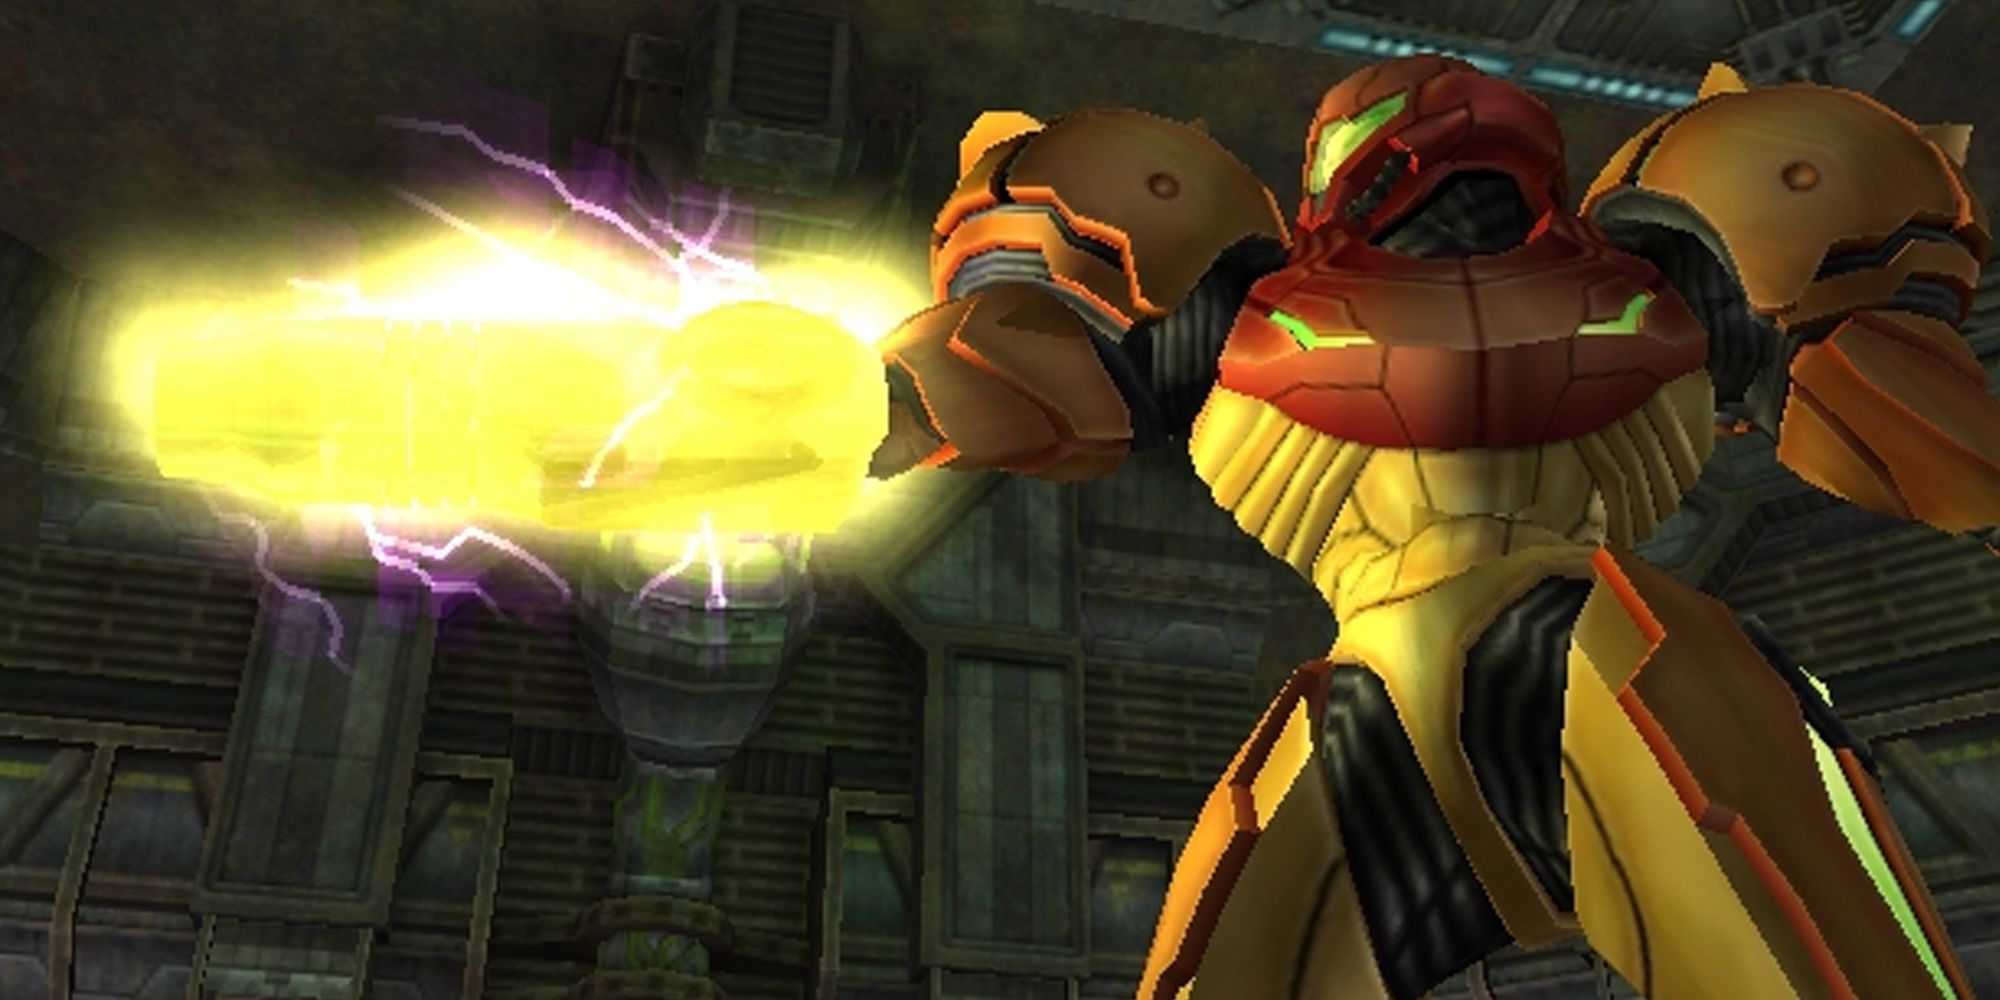 Metroid Prime 2 Samus side-profile, firing her arm canon as it glows yellow with purple lightning